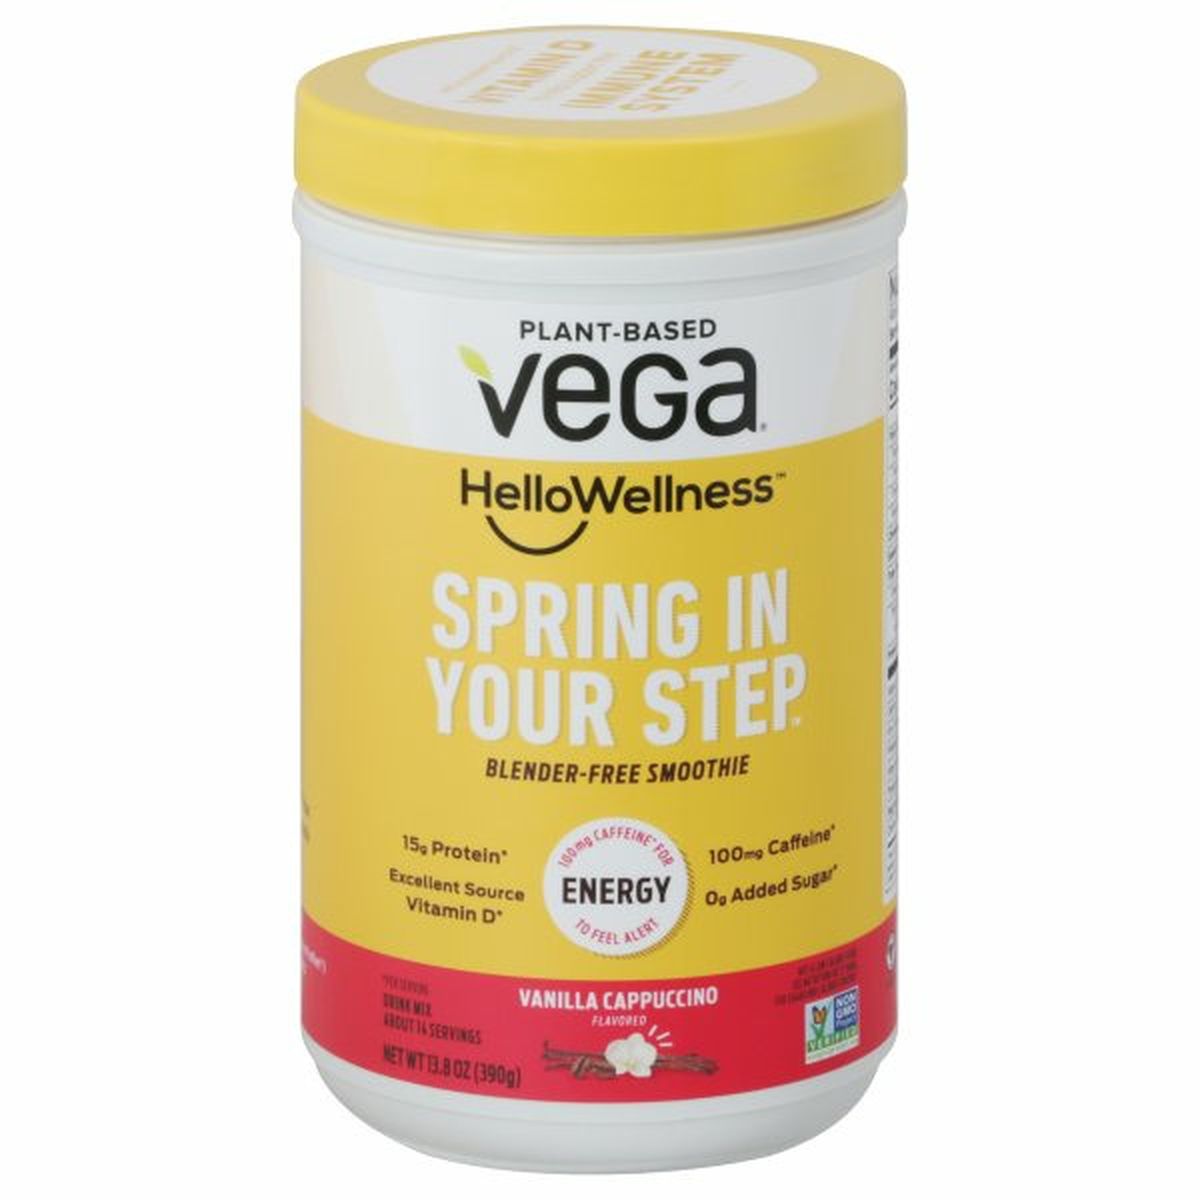 Calories in Vega HelloWellness Drink Mix, Vanilla Cappuccino Flavored, Energy, Spring in Your Step